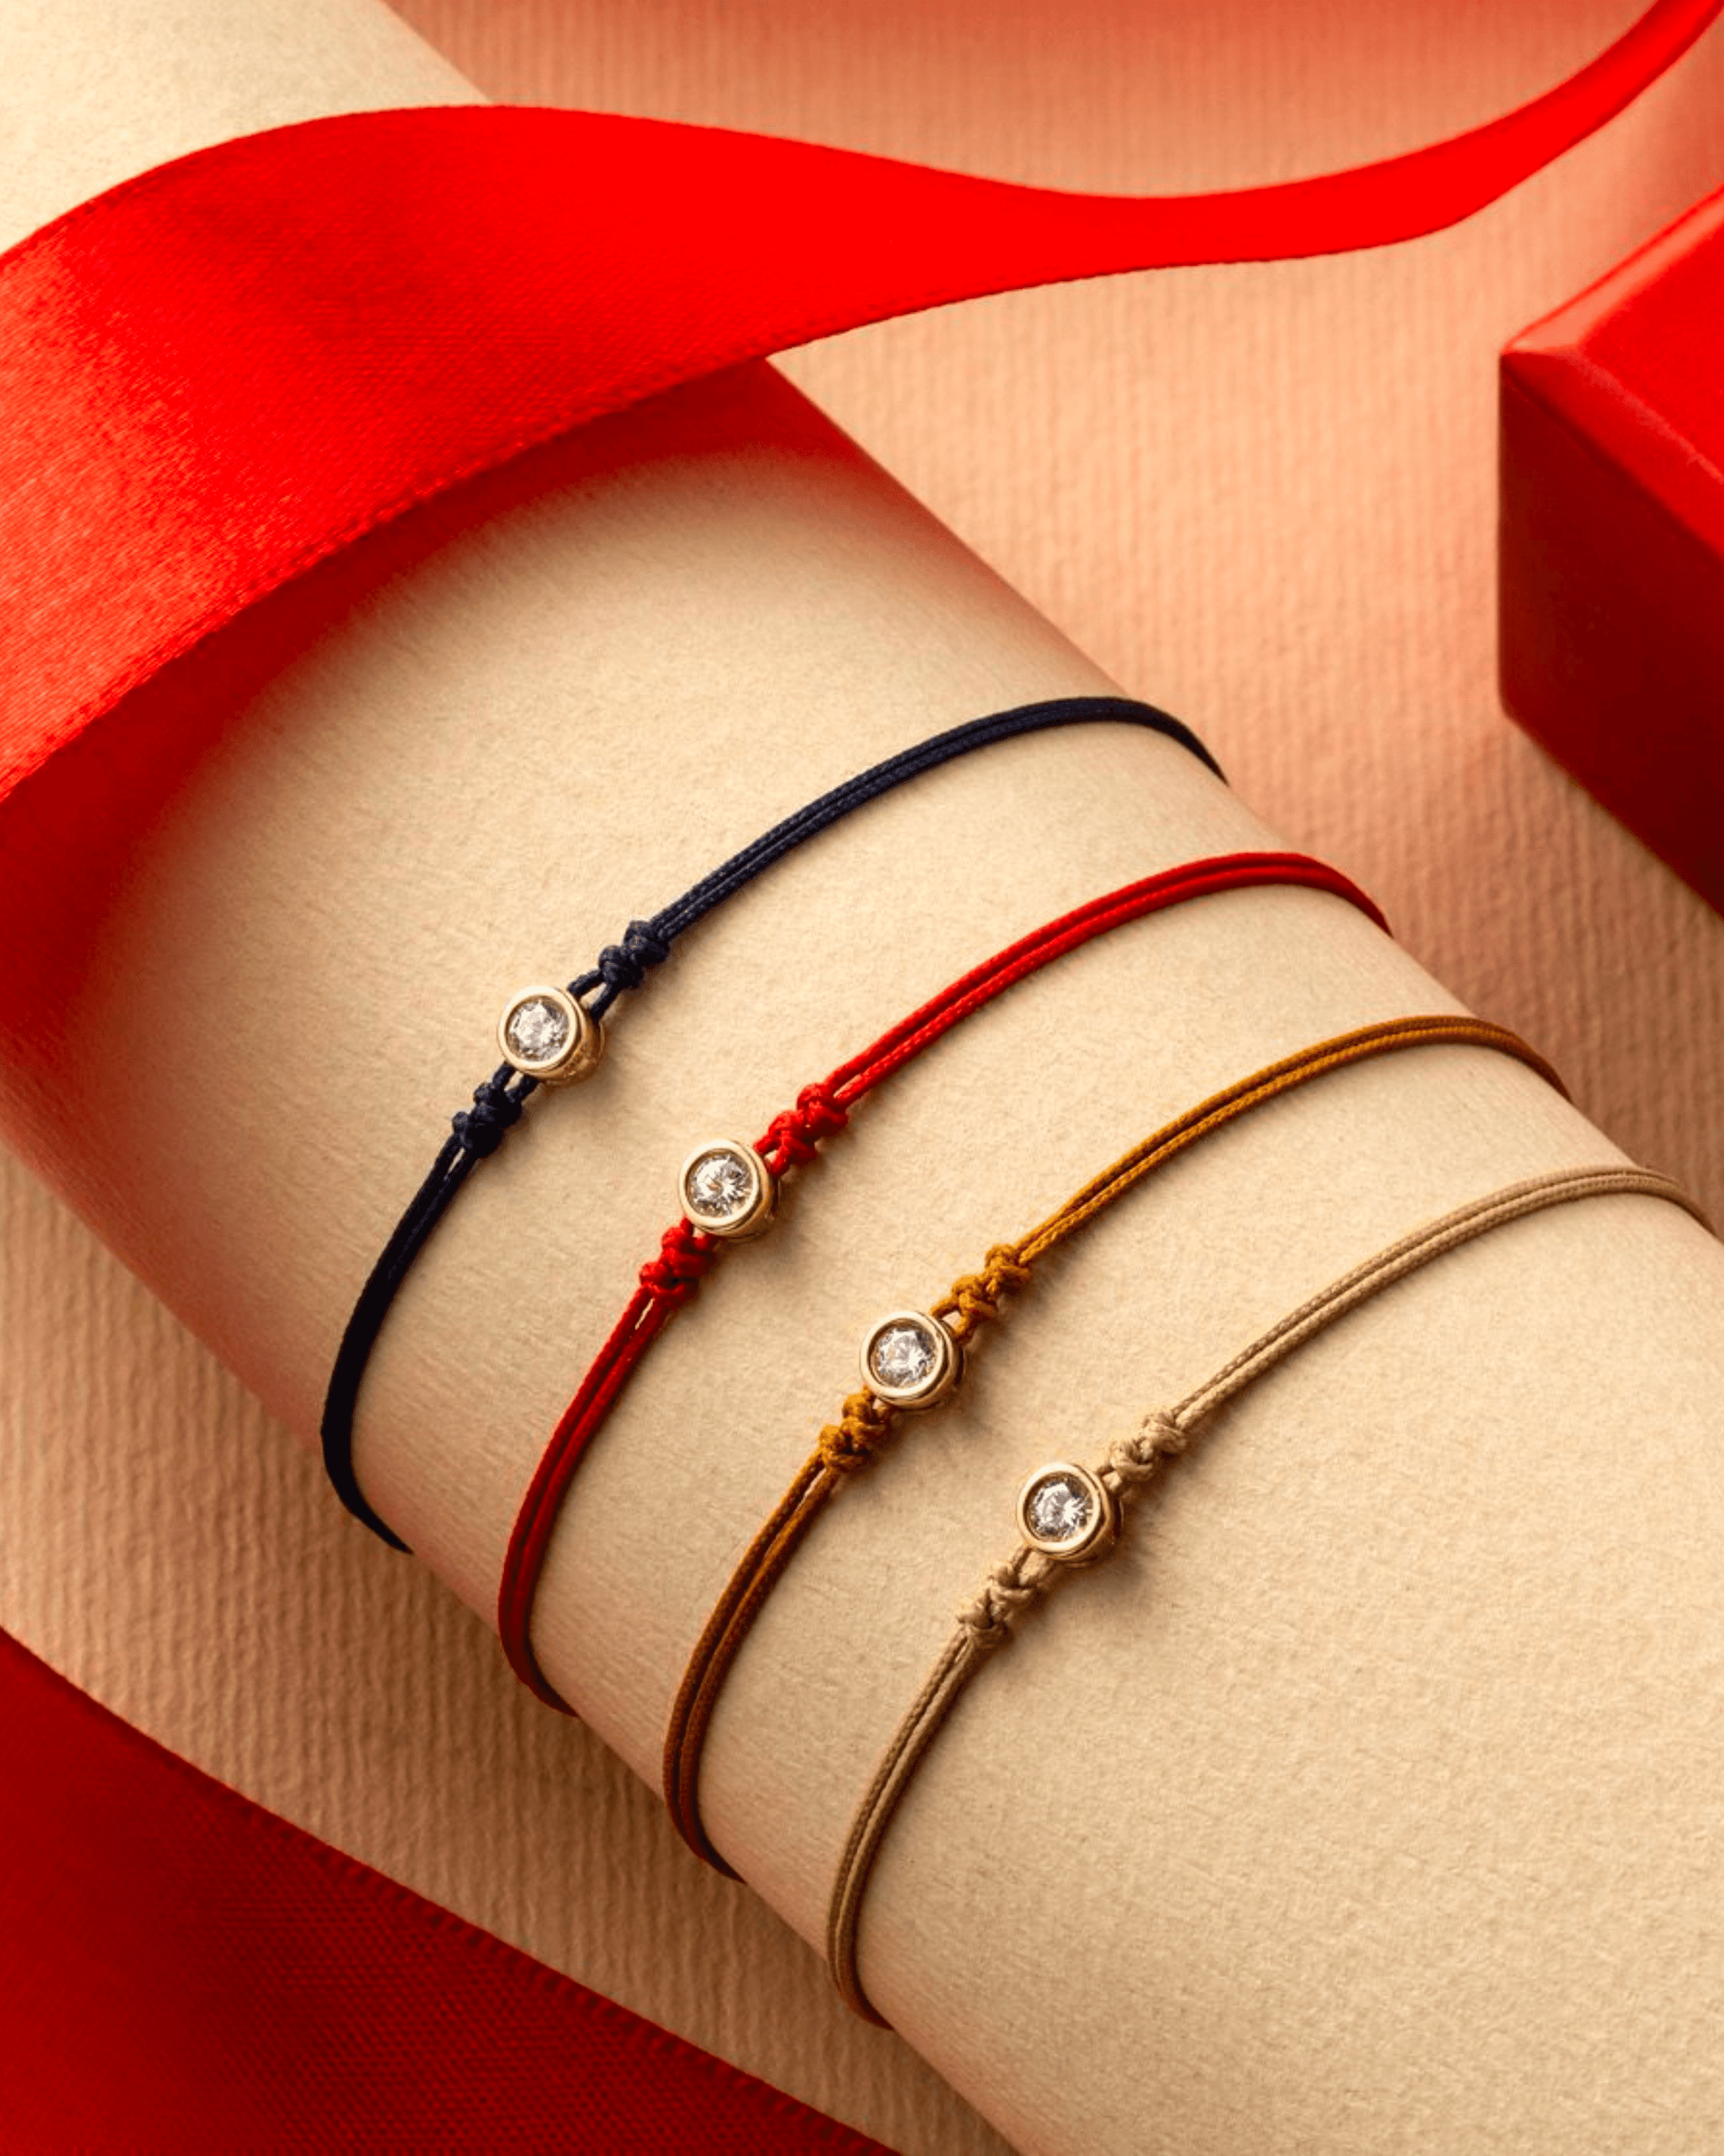 The Classic String of Love - 14K Yellow Gold Bracelets magal-dev 